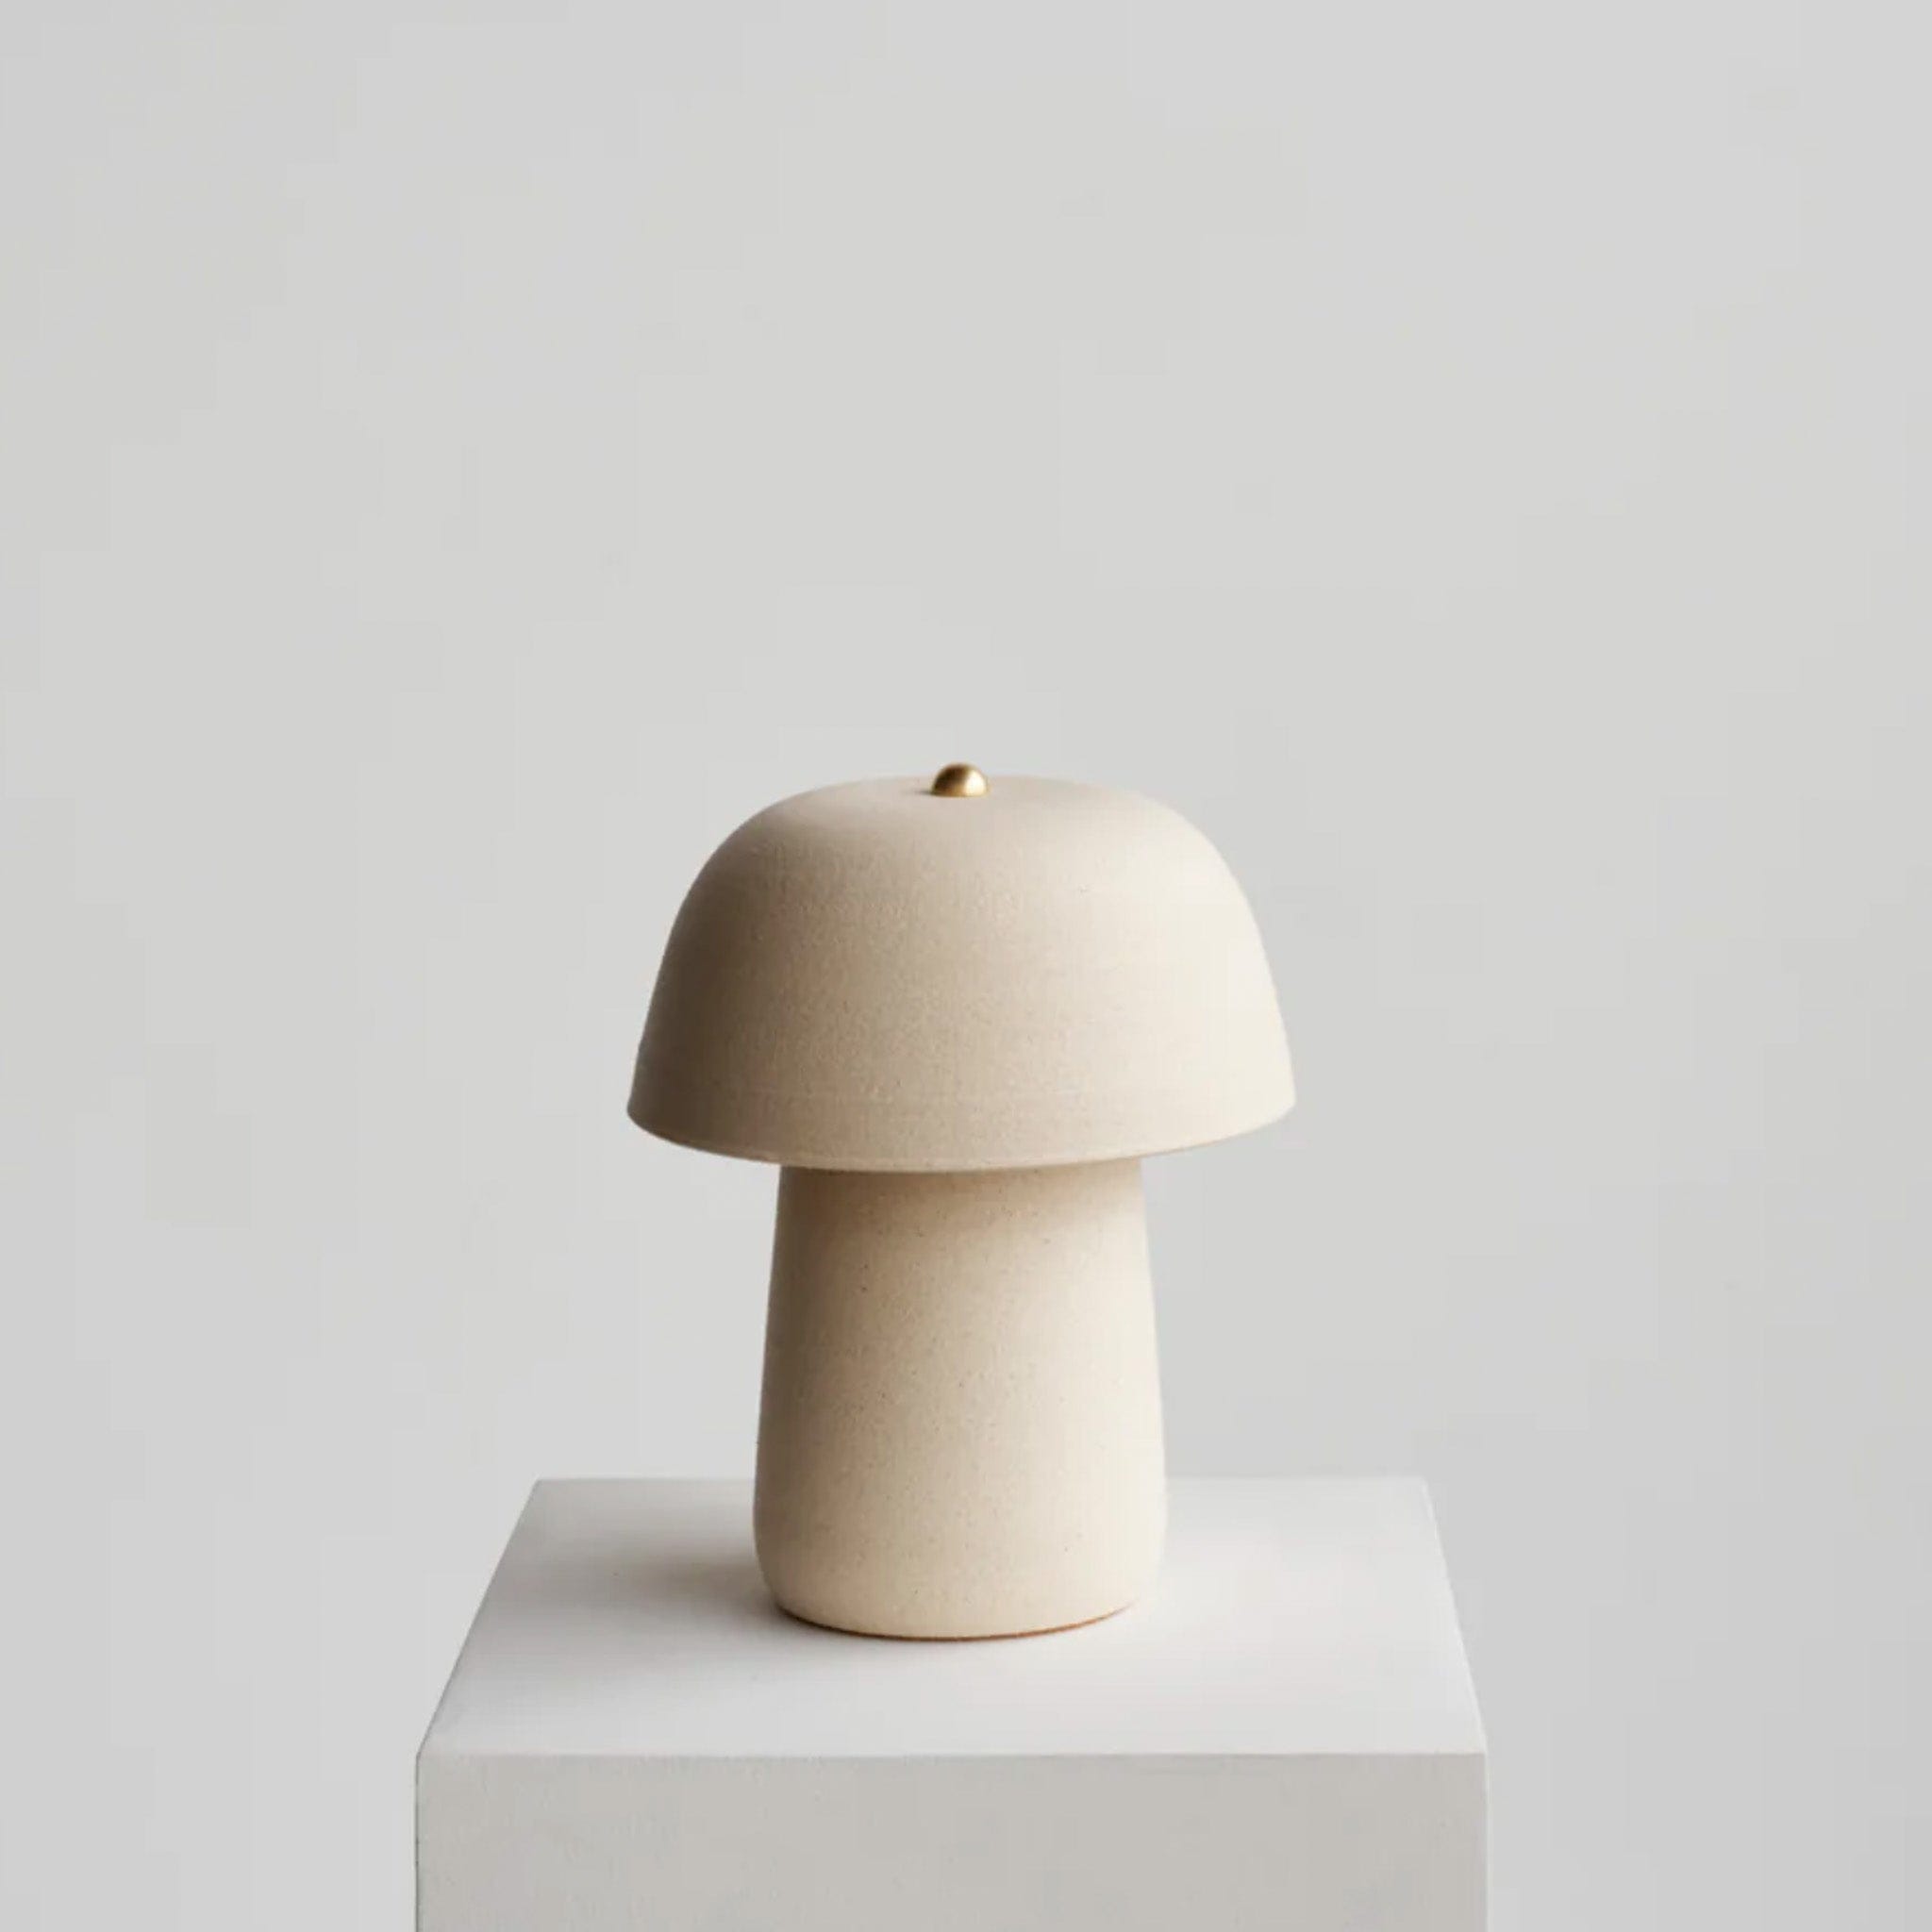 Ceramicah Decor Stone Mini Tera Lamp by Ceramicah | CURBSIDE PICK UP ONLY